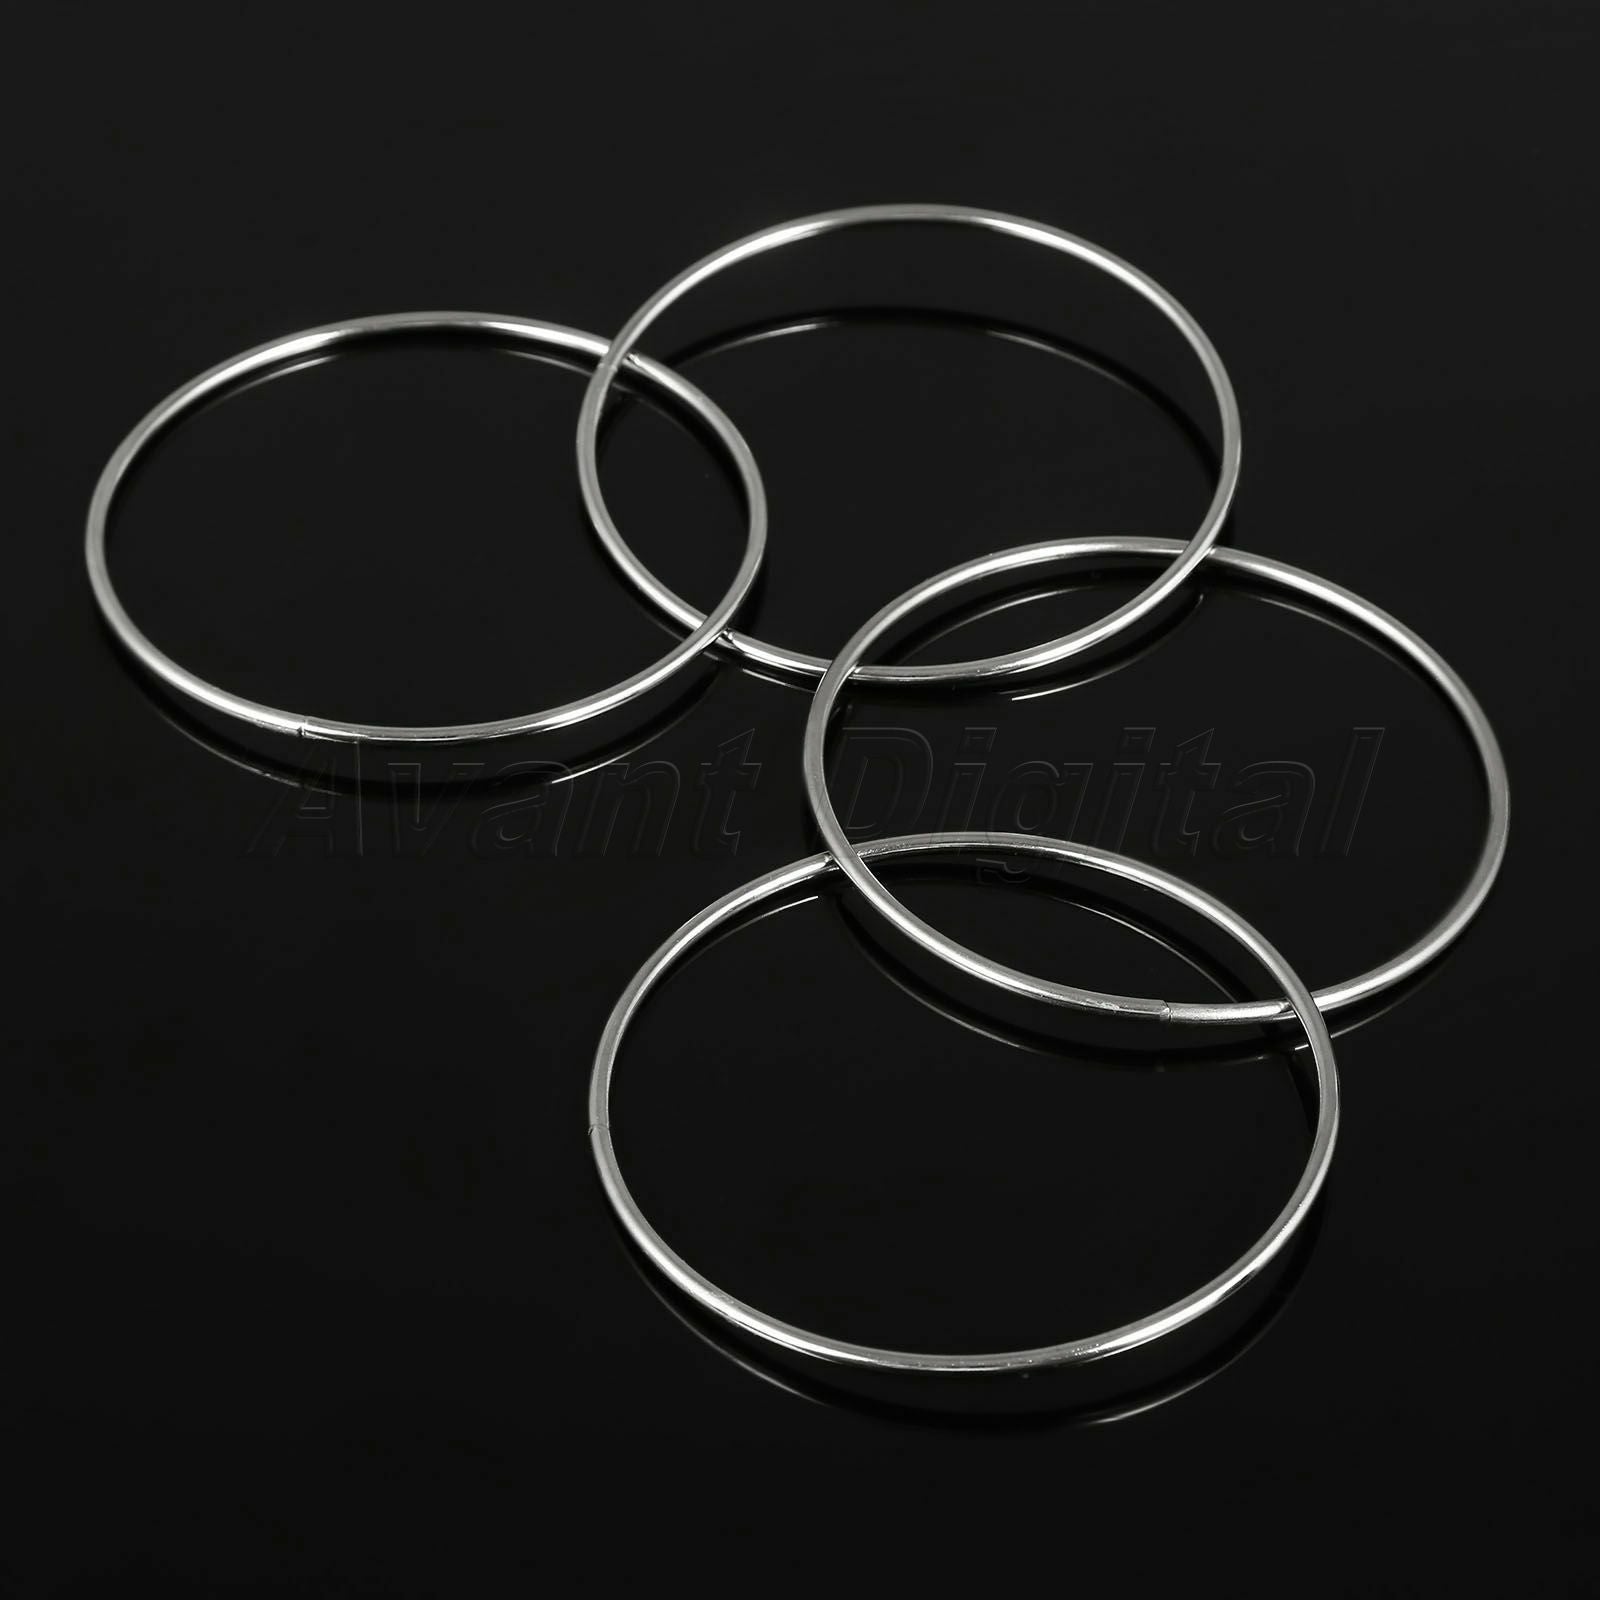 10cm Four Chain Chinese Ring Close-Up Magic Trick Props Magic Classic Toys